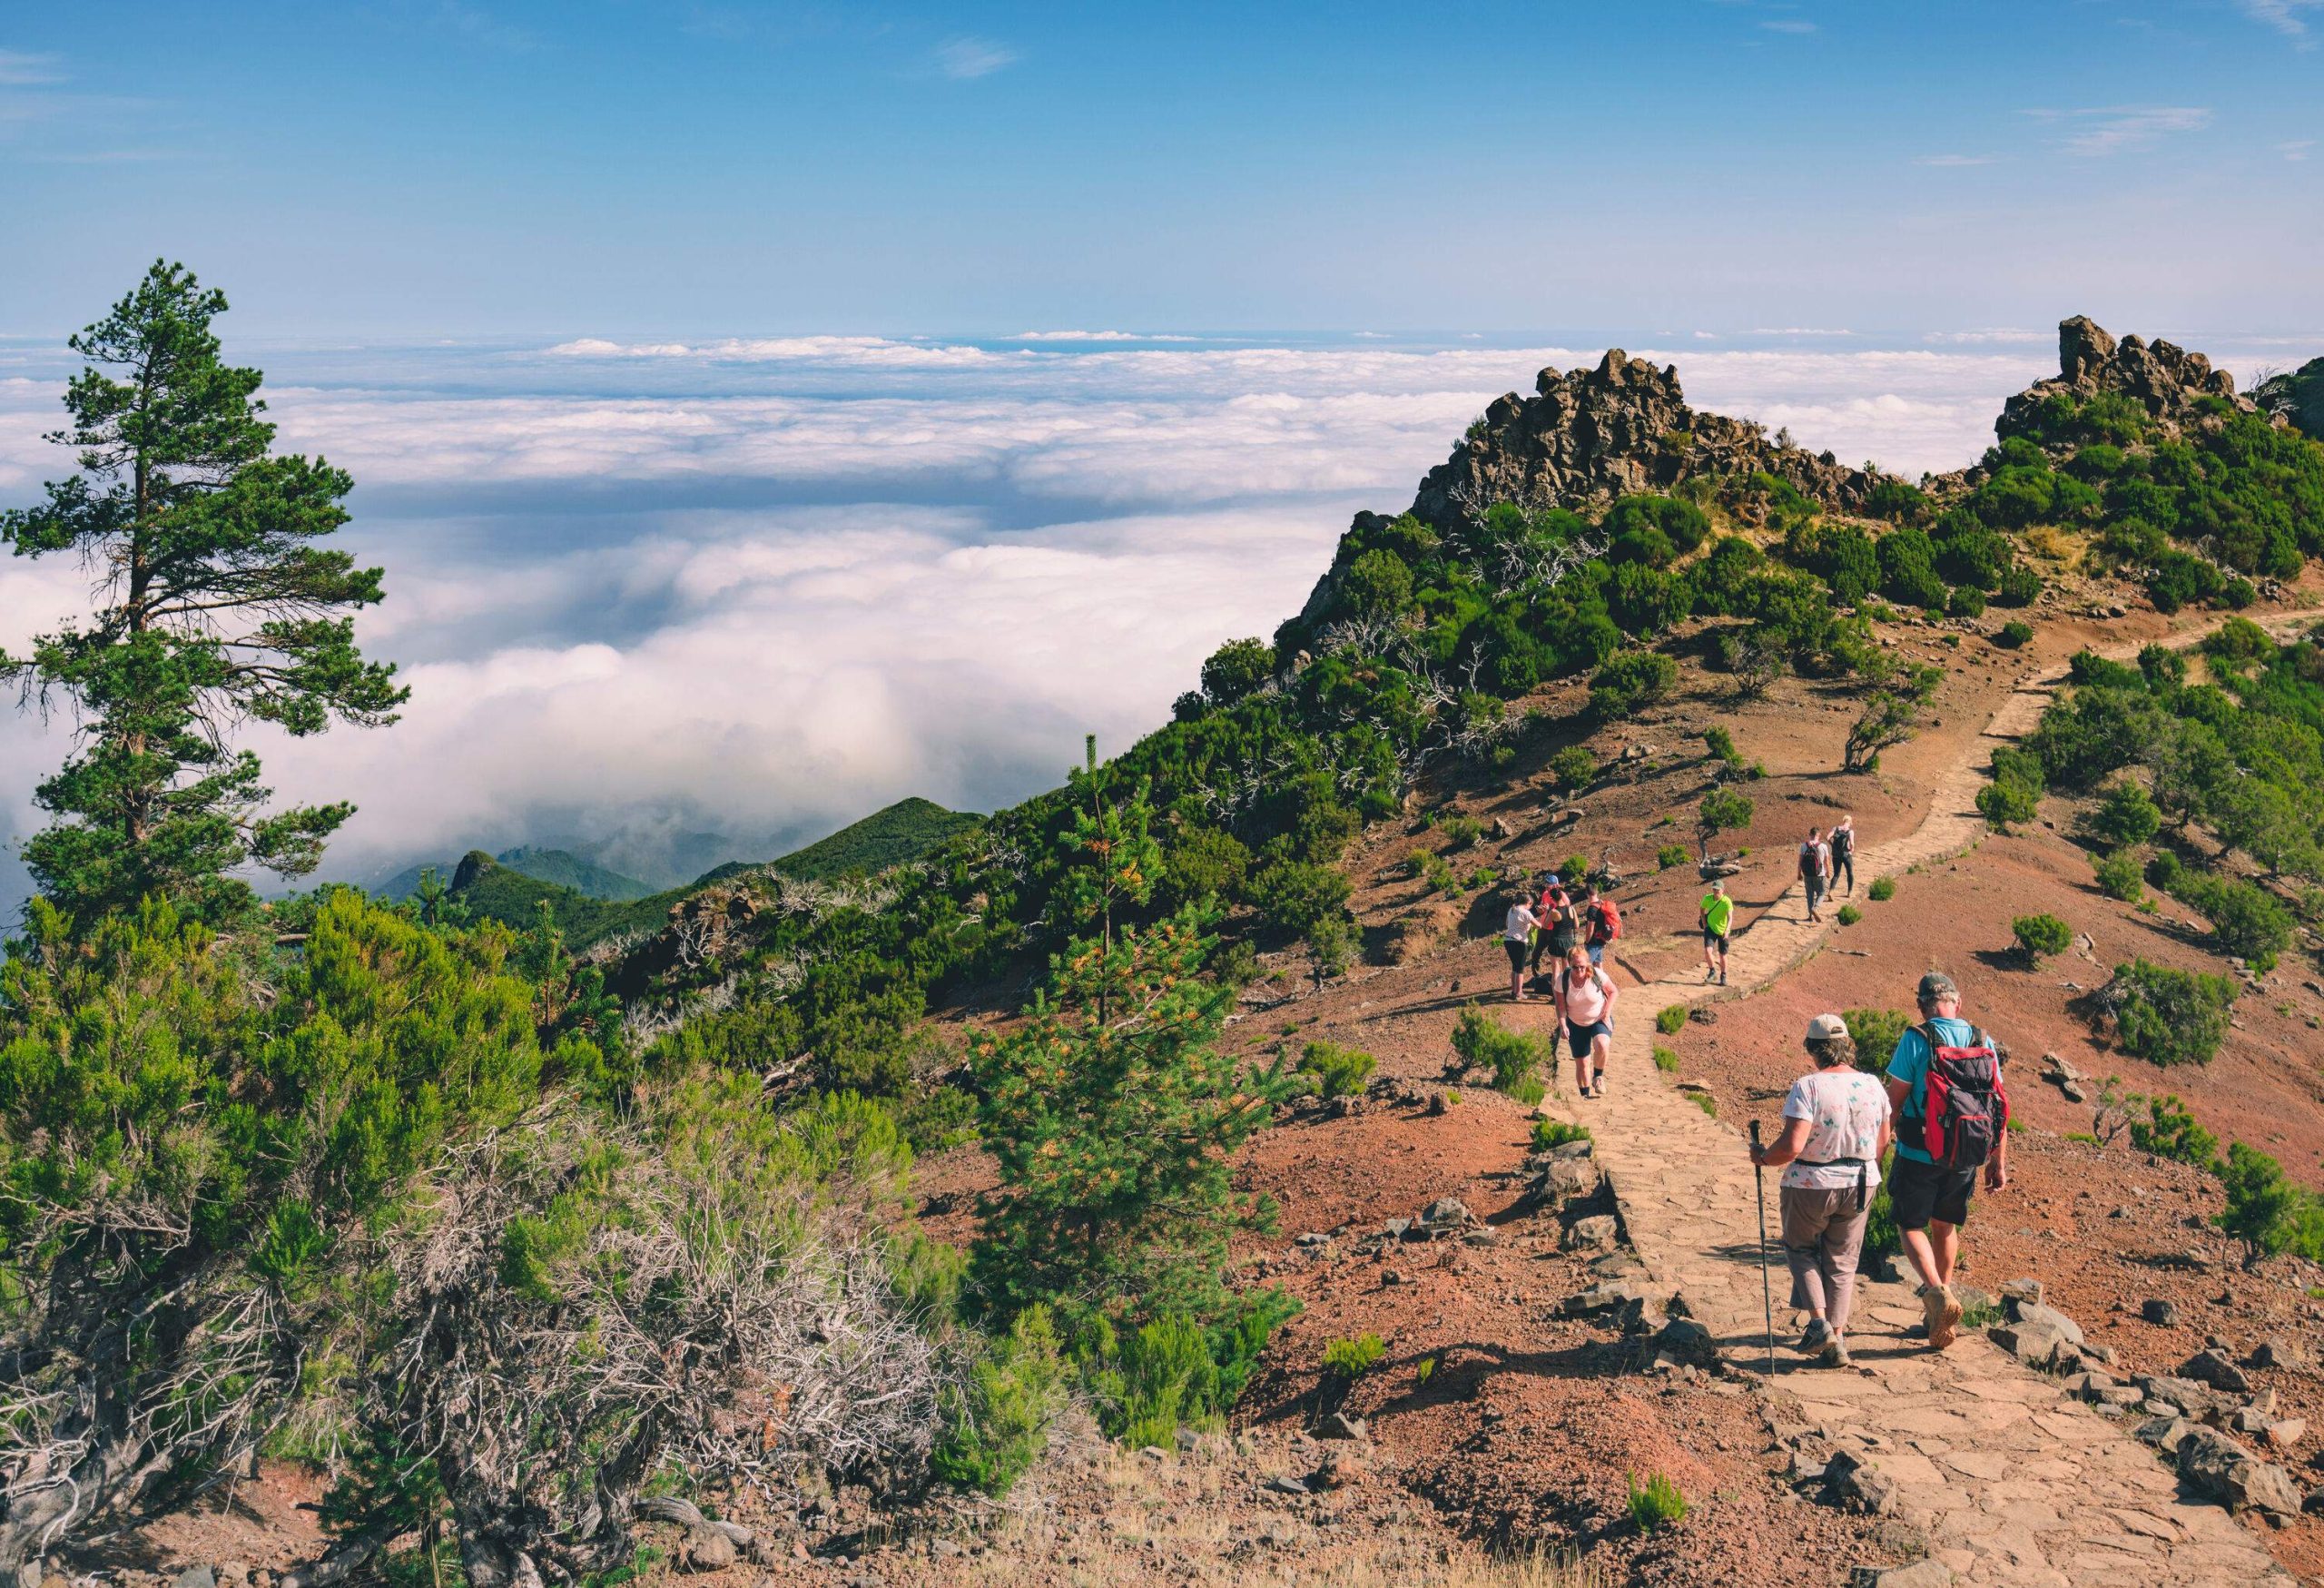 People walking on a stone pathway on a mountain with overlooking views of the horizon covered in clouds.